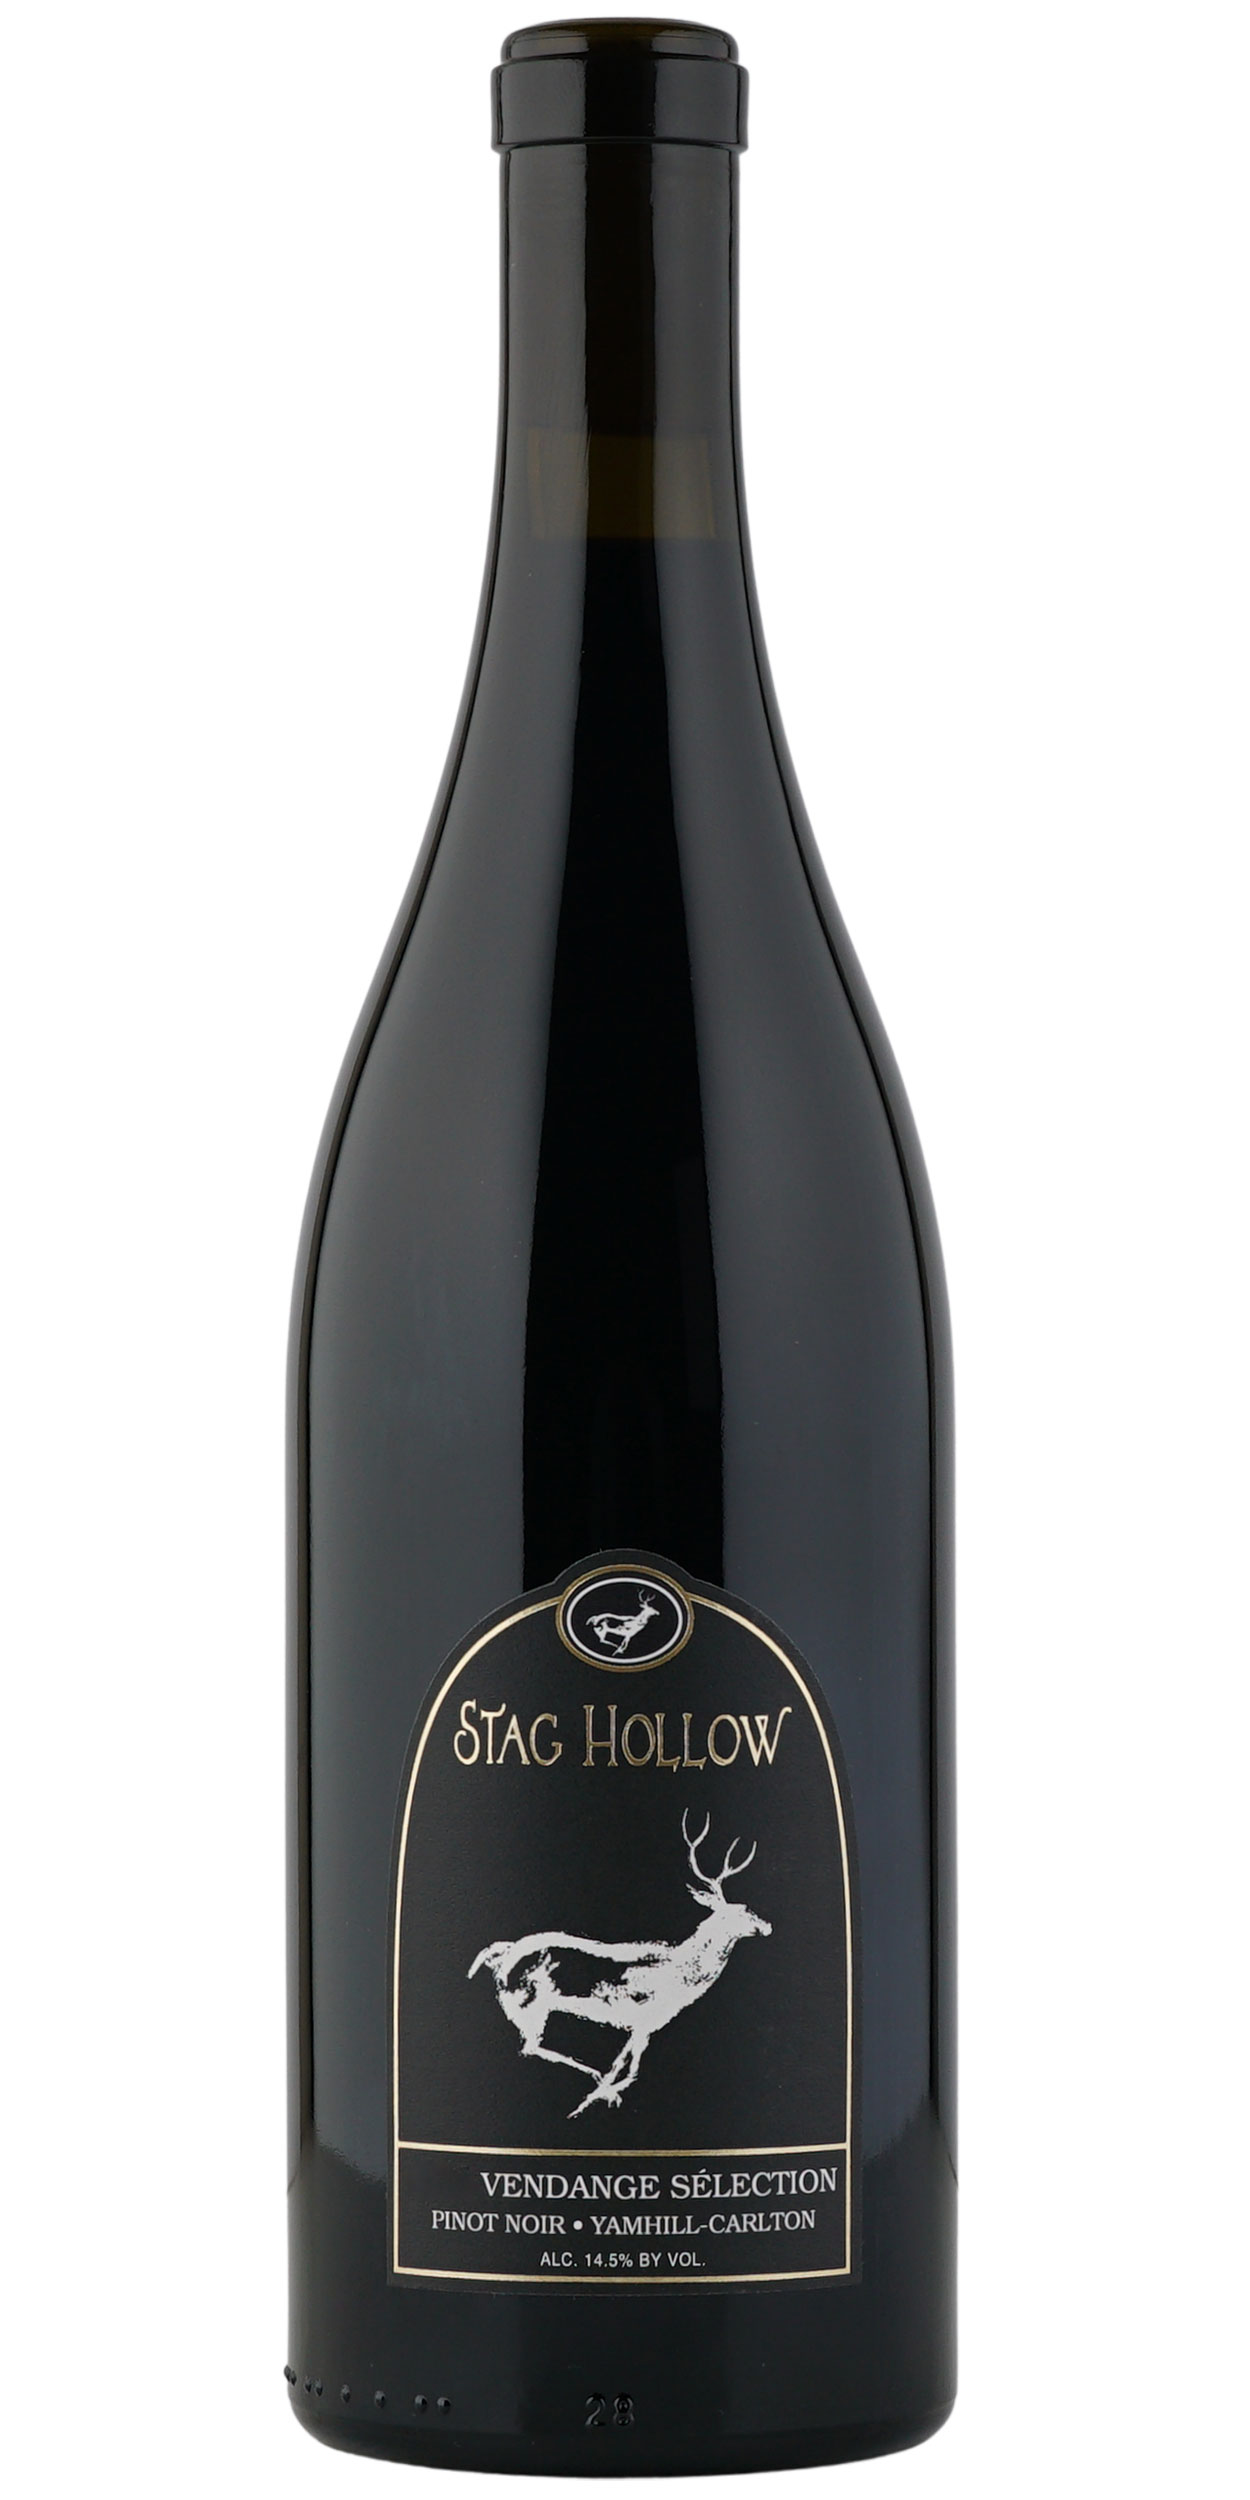 Bottle of Stag Hollow Vendange Selection